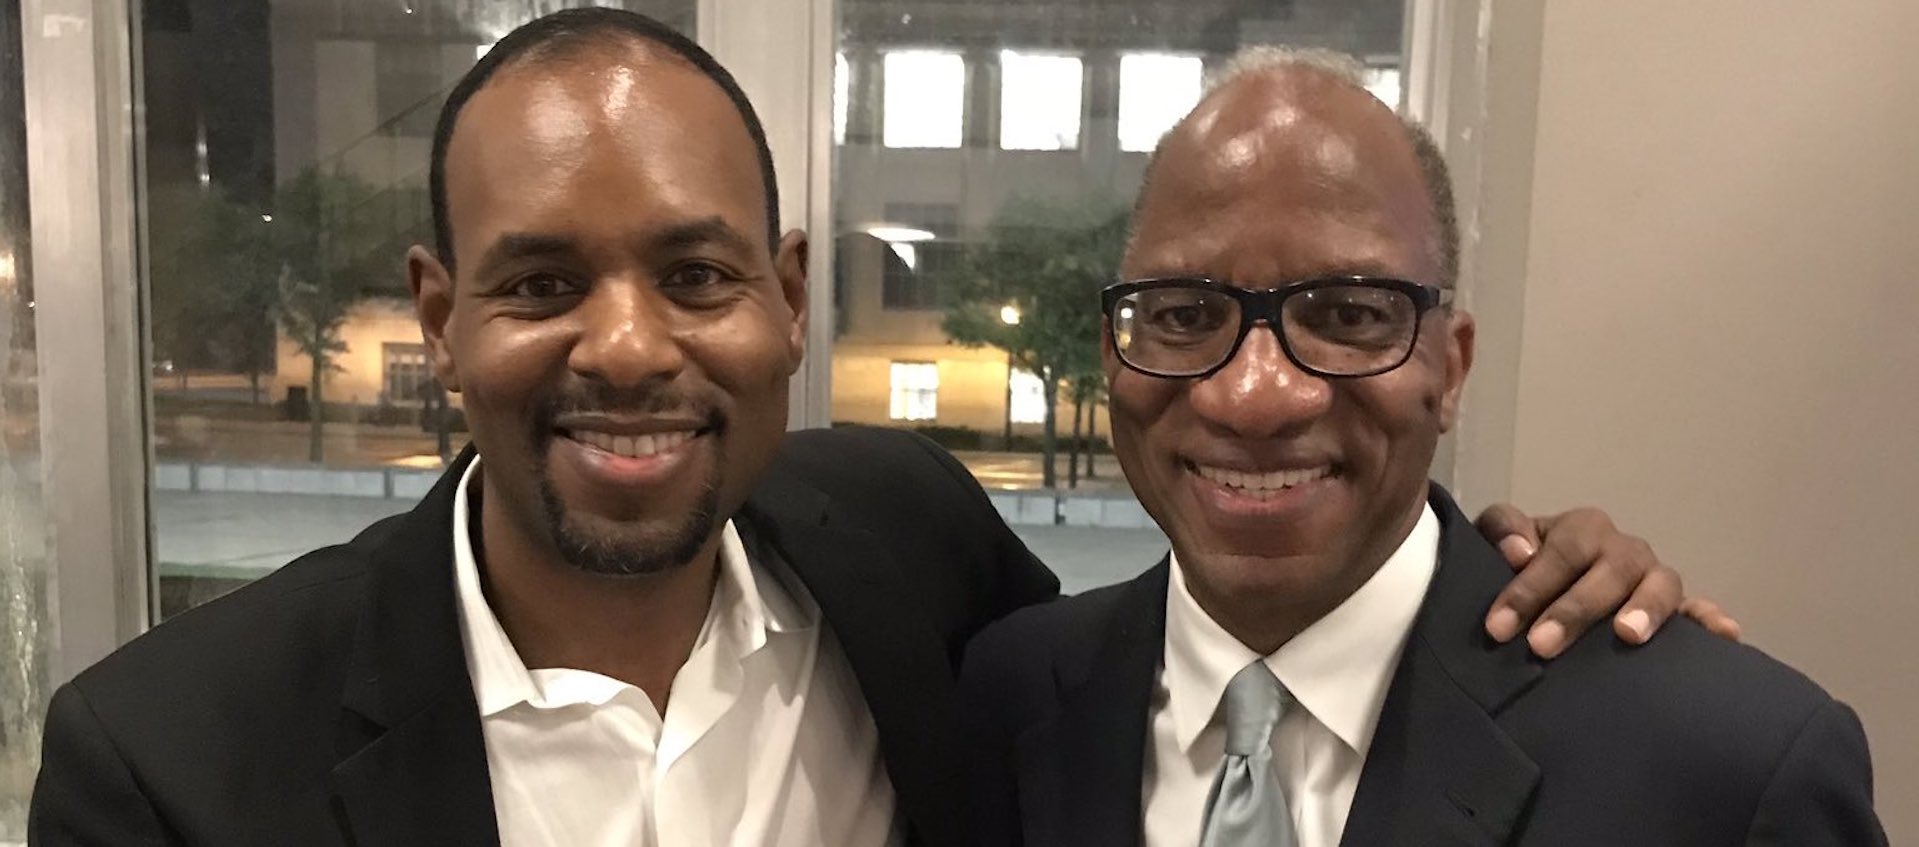 photo of writer-filmmaker Chris Bournea and Tigerland author Wil Haygood at the Wexner Center's 2018 Director's Dialogue on Art and Social Change